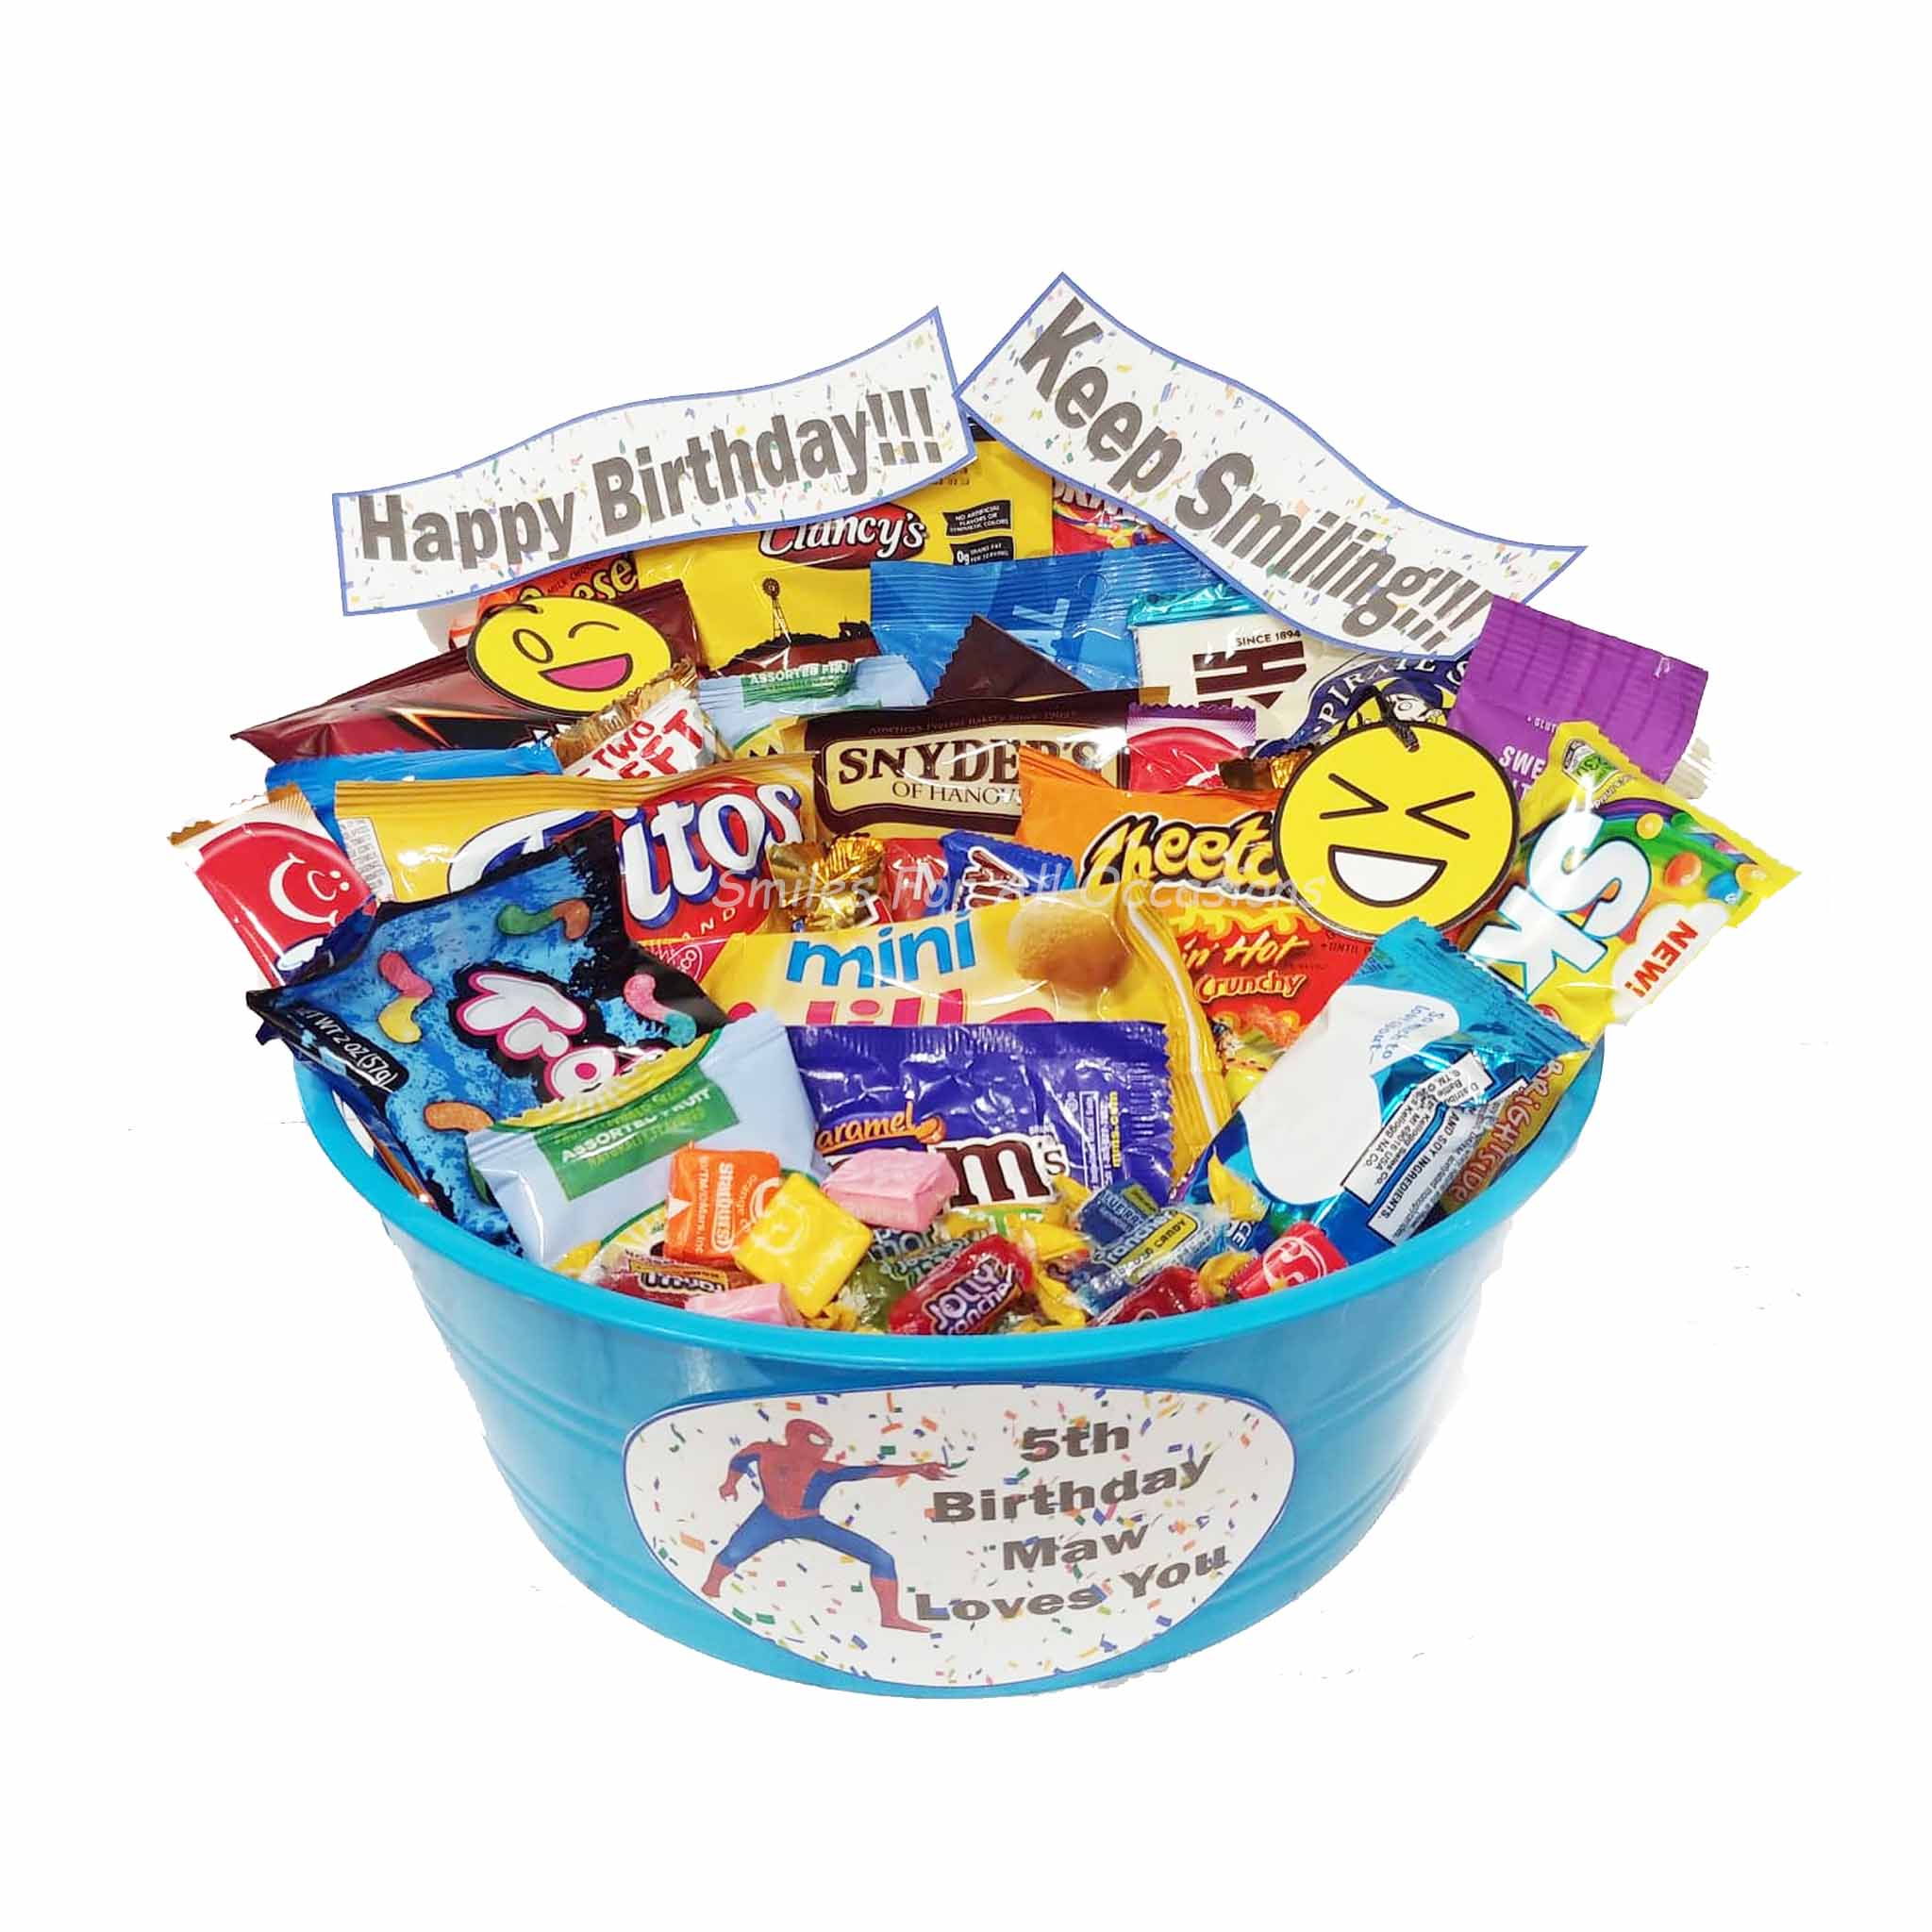 Broadway Basketeers Condolences Gourmet Gift Basket, Kosher Sympathy Food Gift  Baskets for Delivery, Perfect Care Package Box or Assorted Snack Gifts for  Bereavement, Loss, Funeral, or Shiva